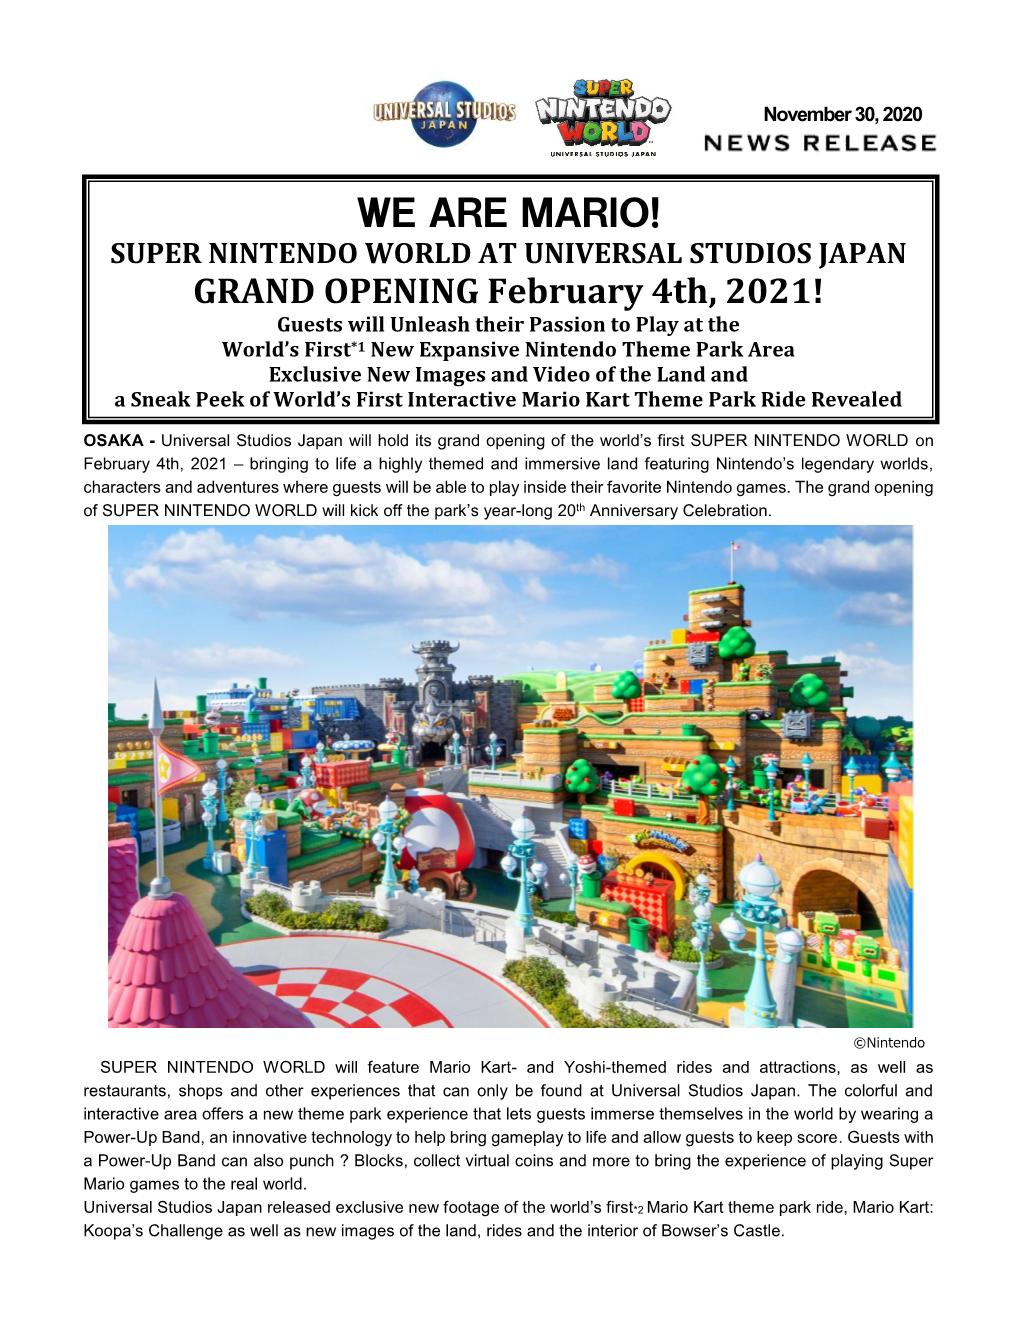 WE ARE MARIO! GRAND OPENING February 4Th, 2021!